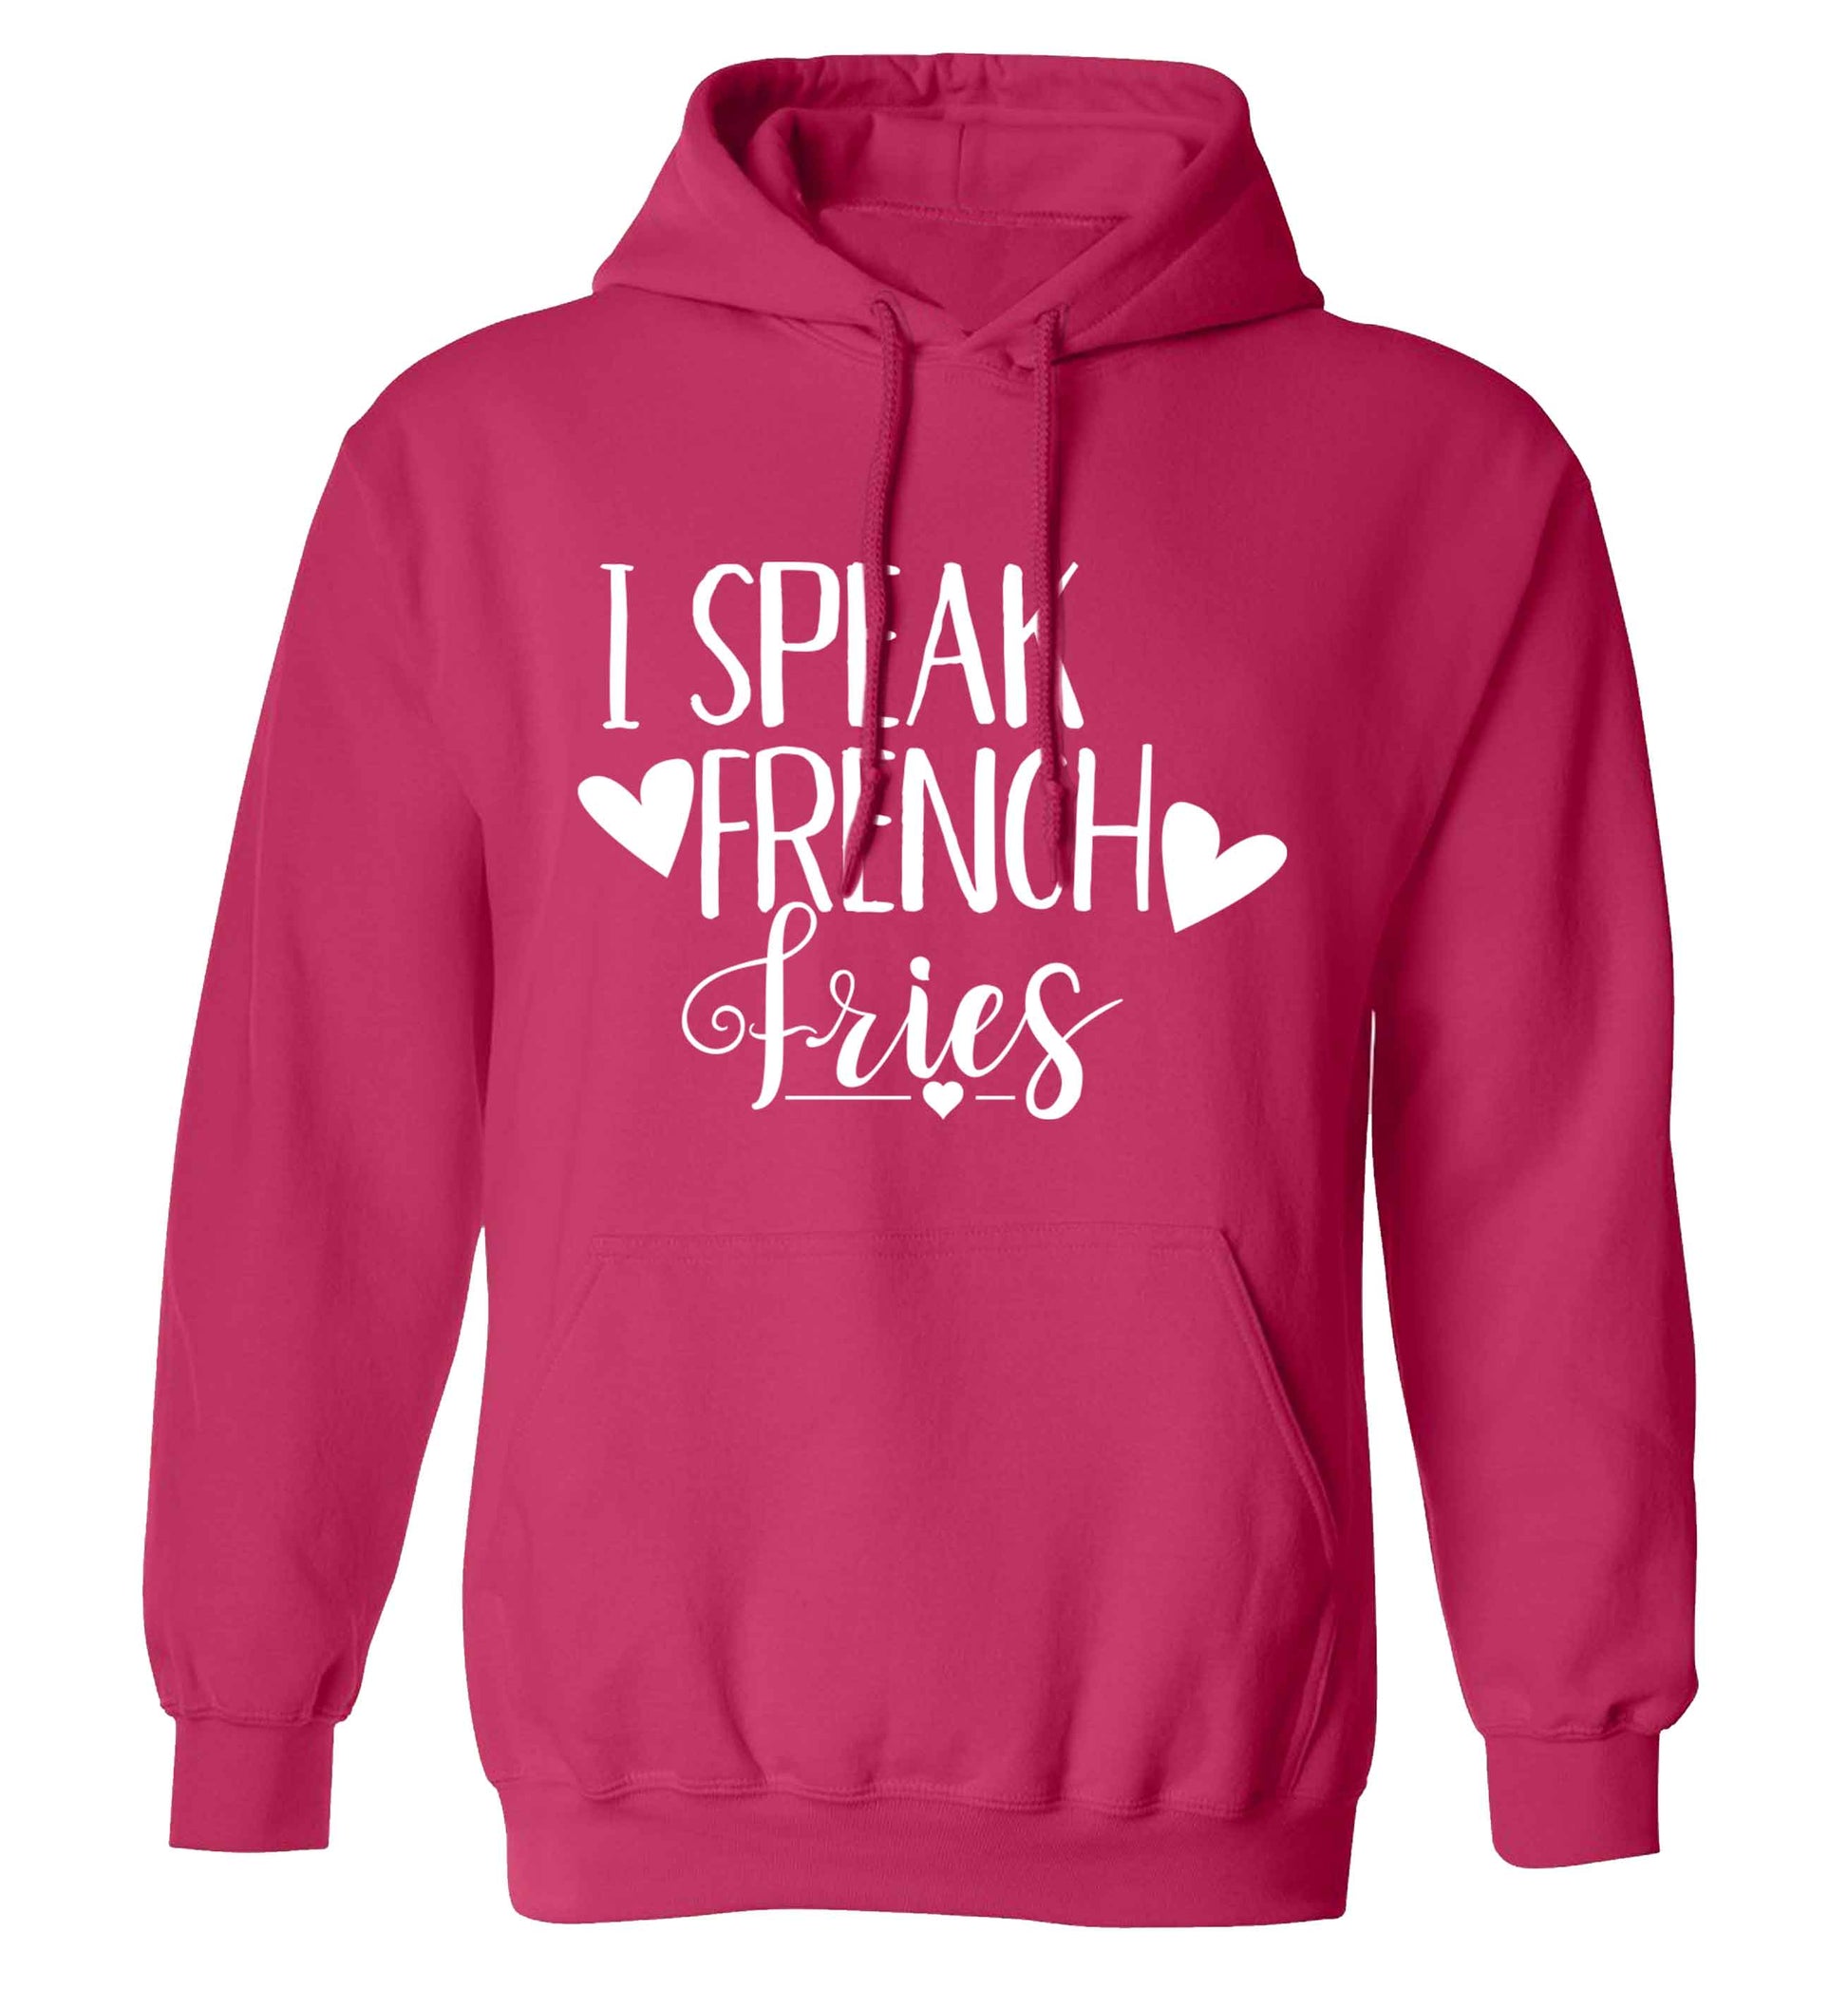 I speak French fries adults unisex pink hoodie 2XL